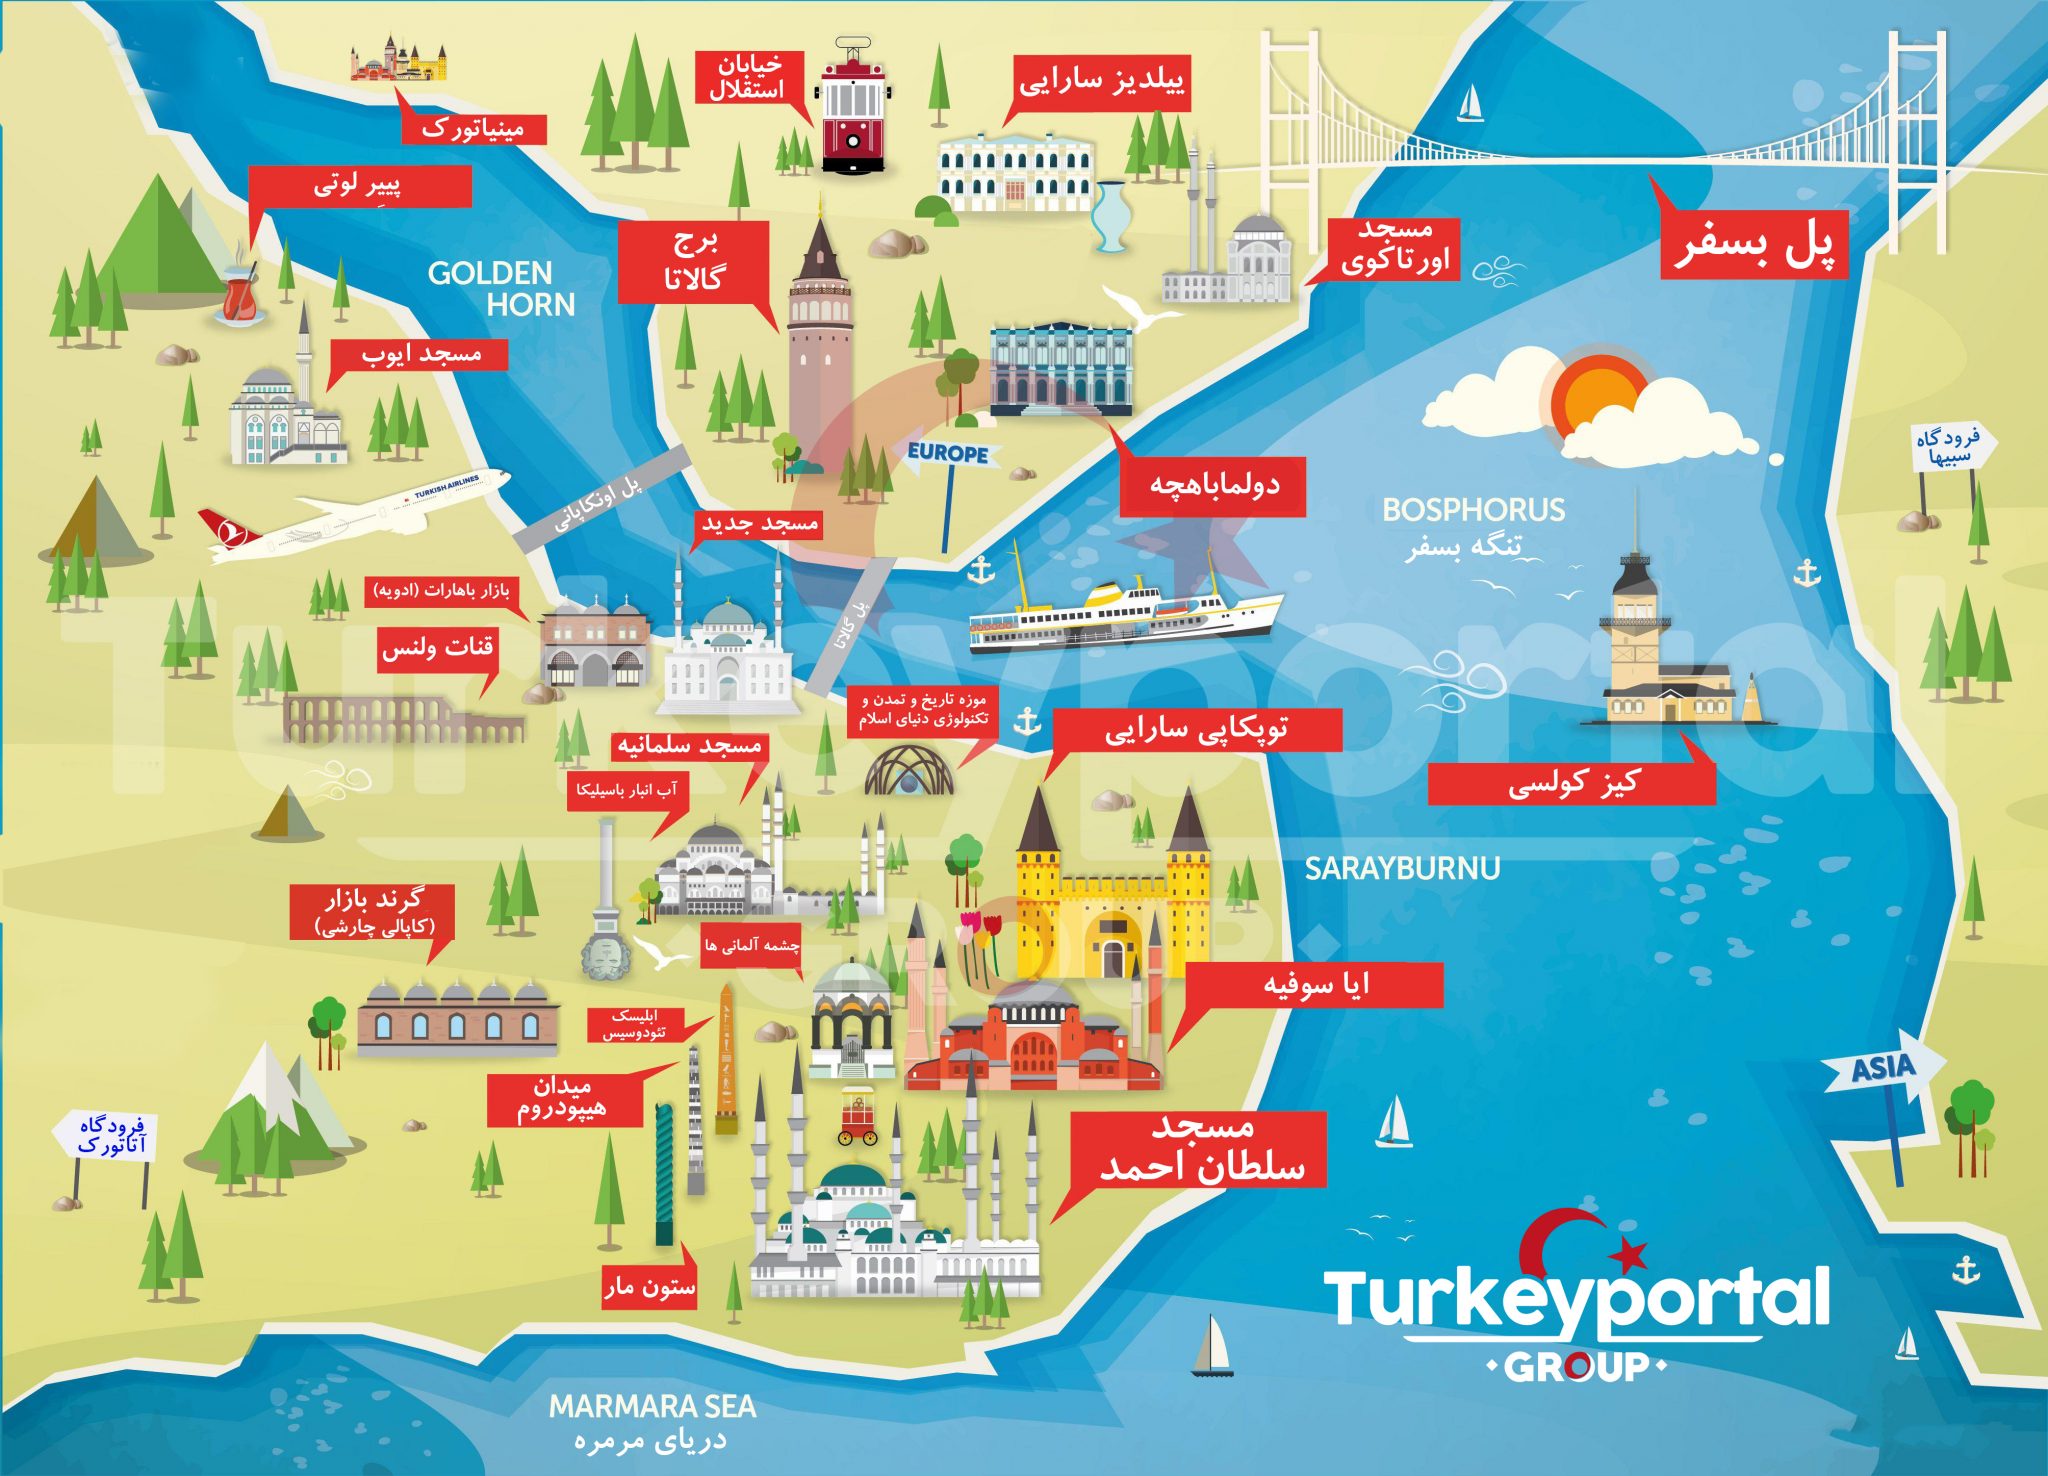 places to visit in istanbul on map